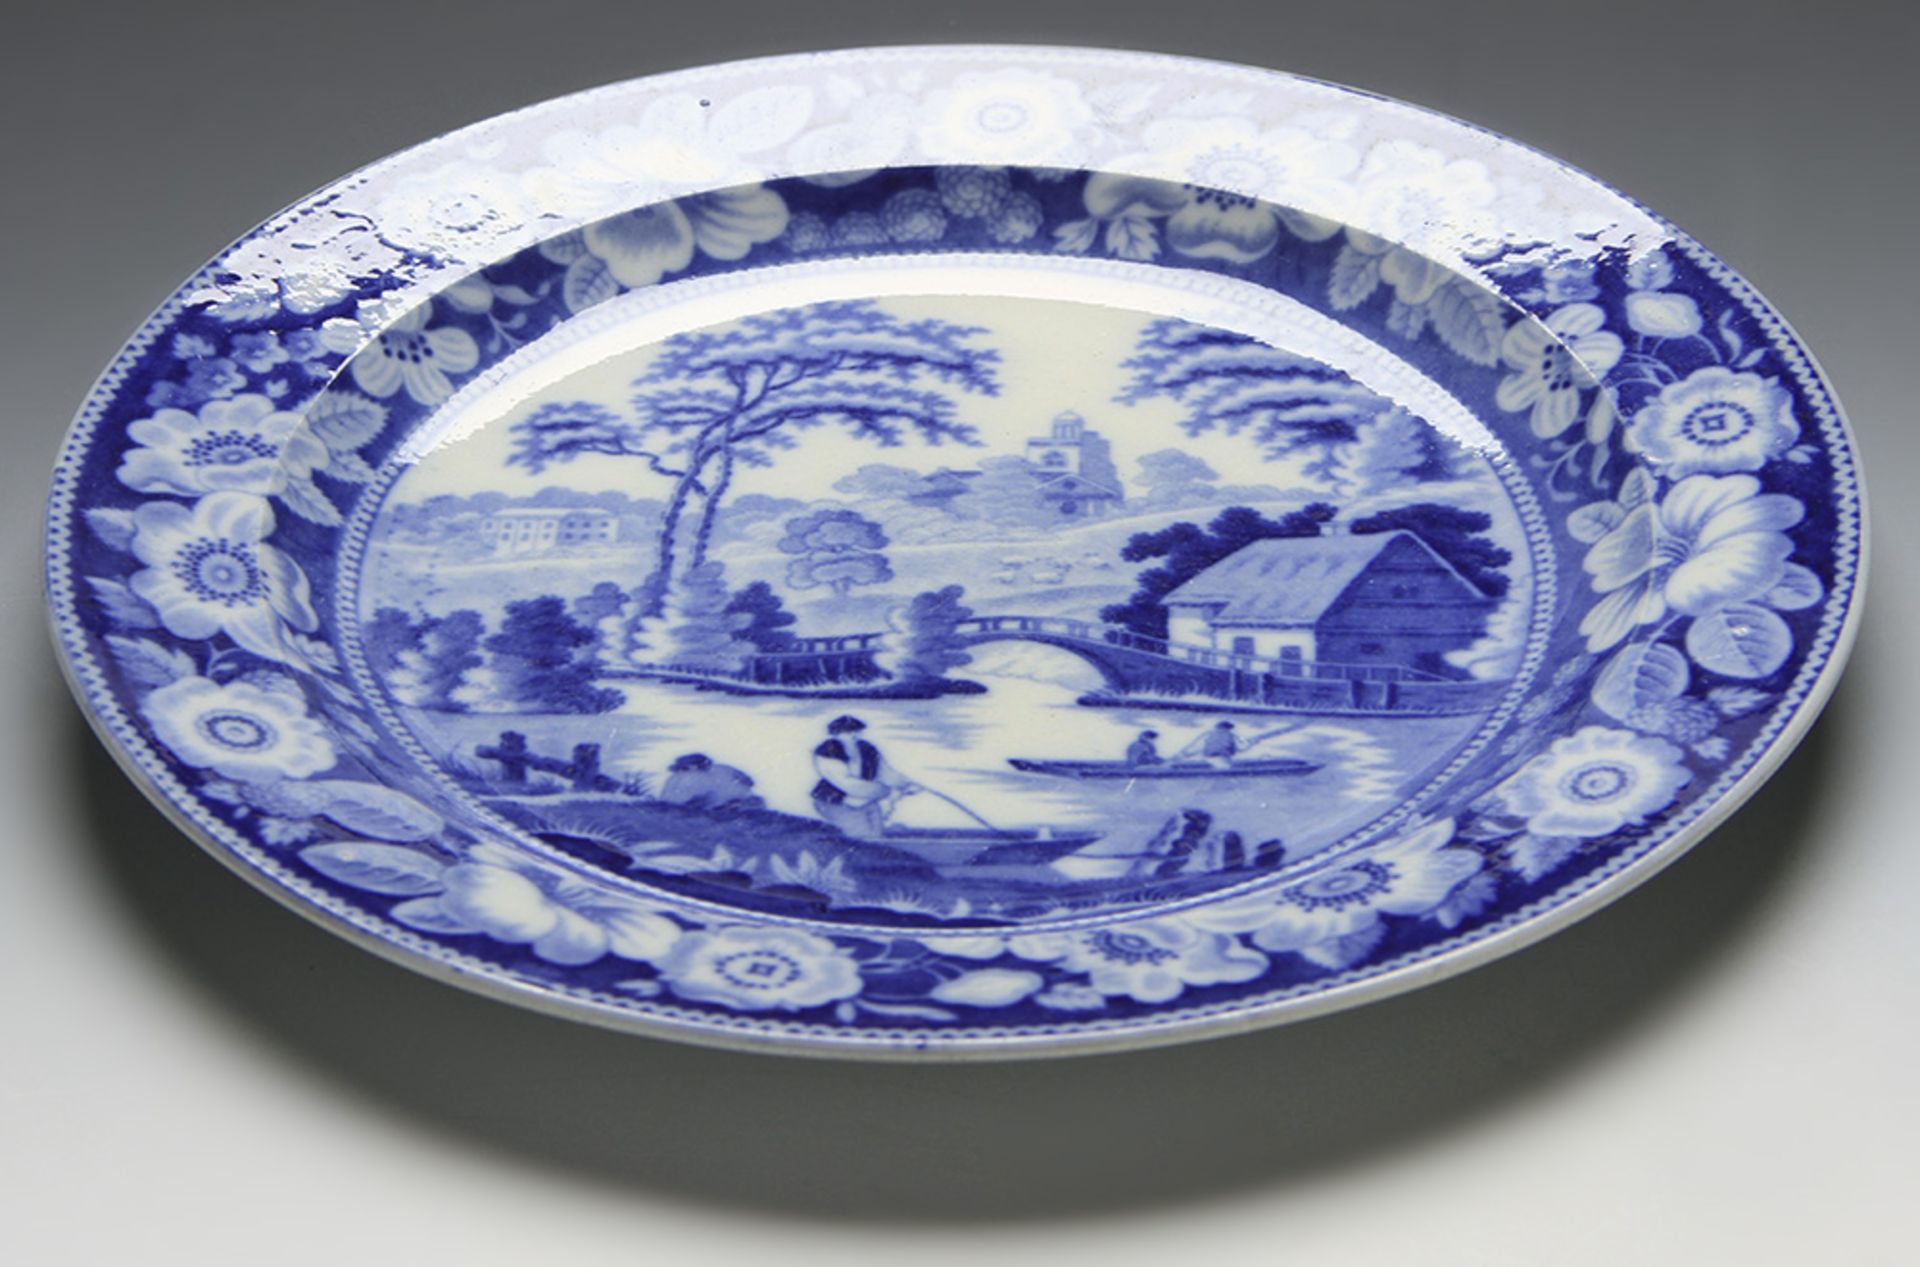 Antique Staffordshire Wild Rose Blue & White Plate C.1830 - Image 8 of 8